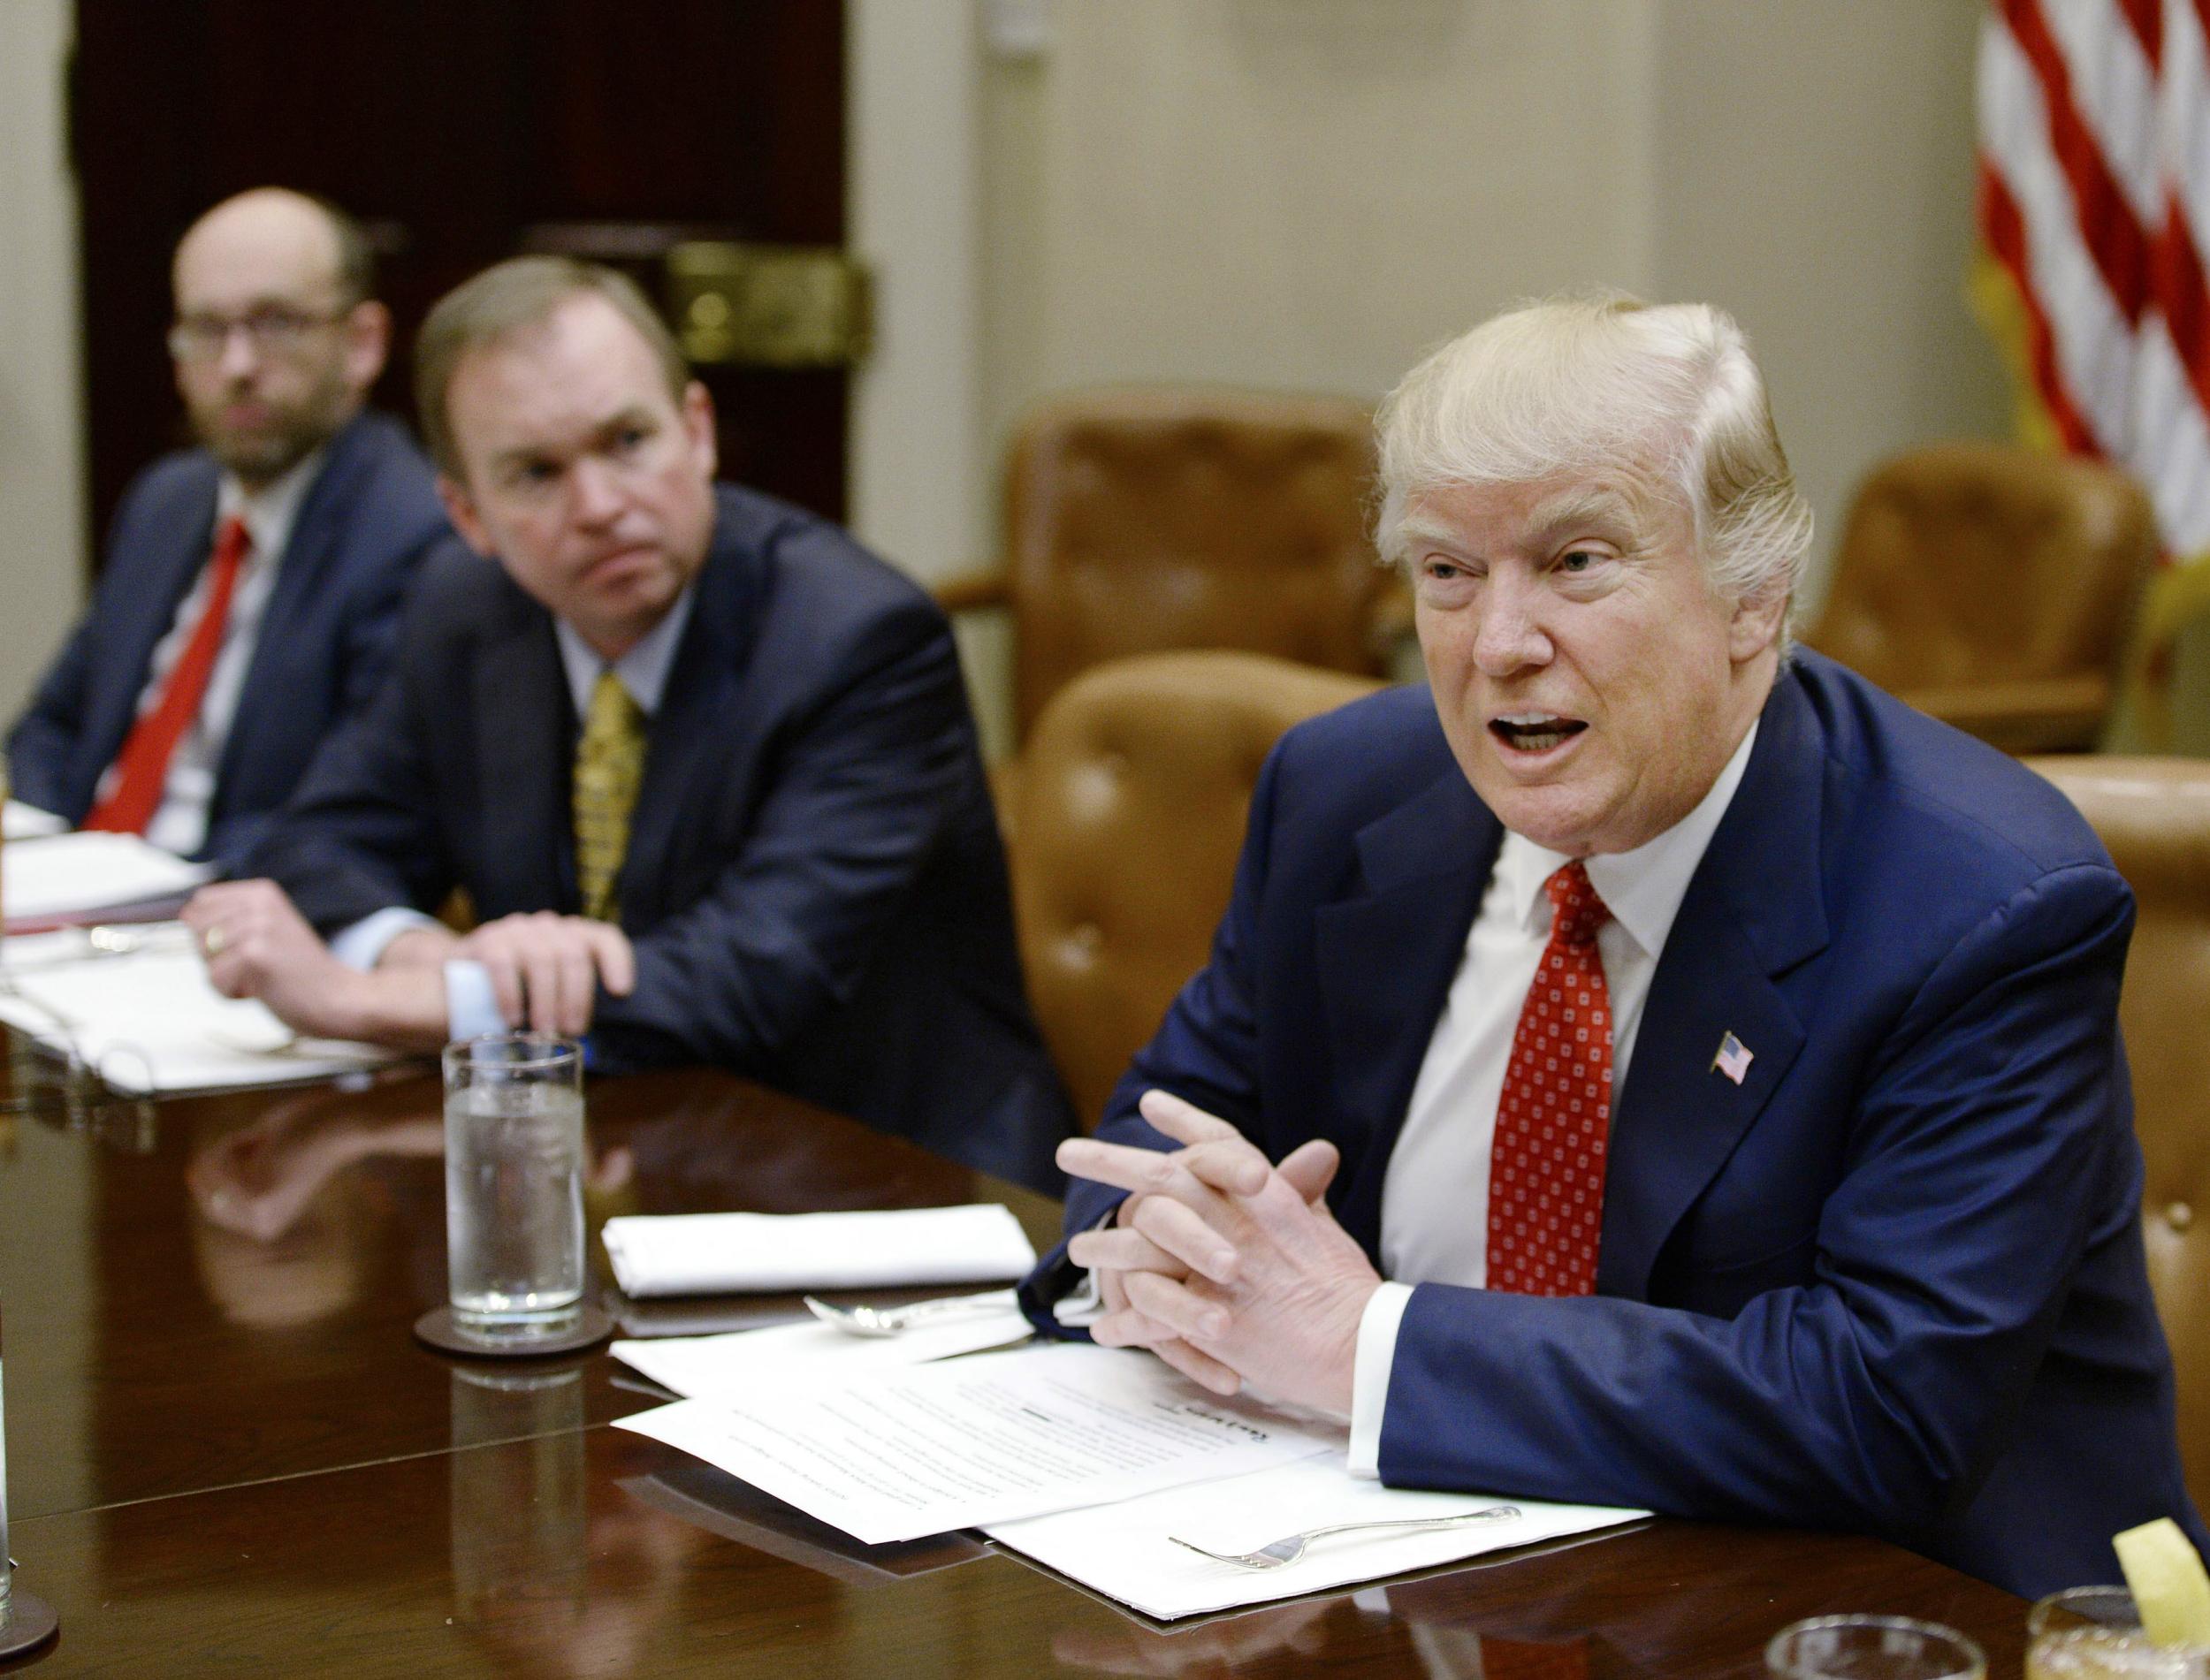 President Donald Trump discusses the federal budget in the Roosevelt Room of the White House on 22 February 2017